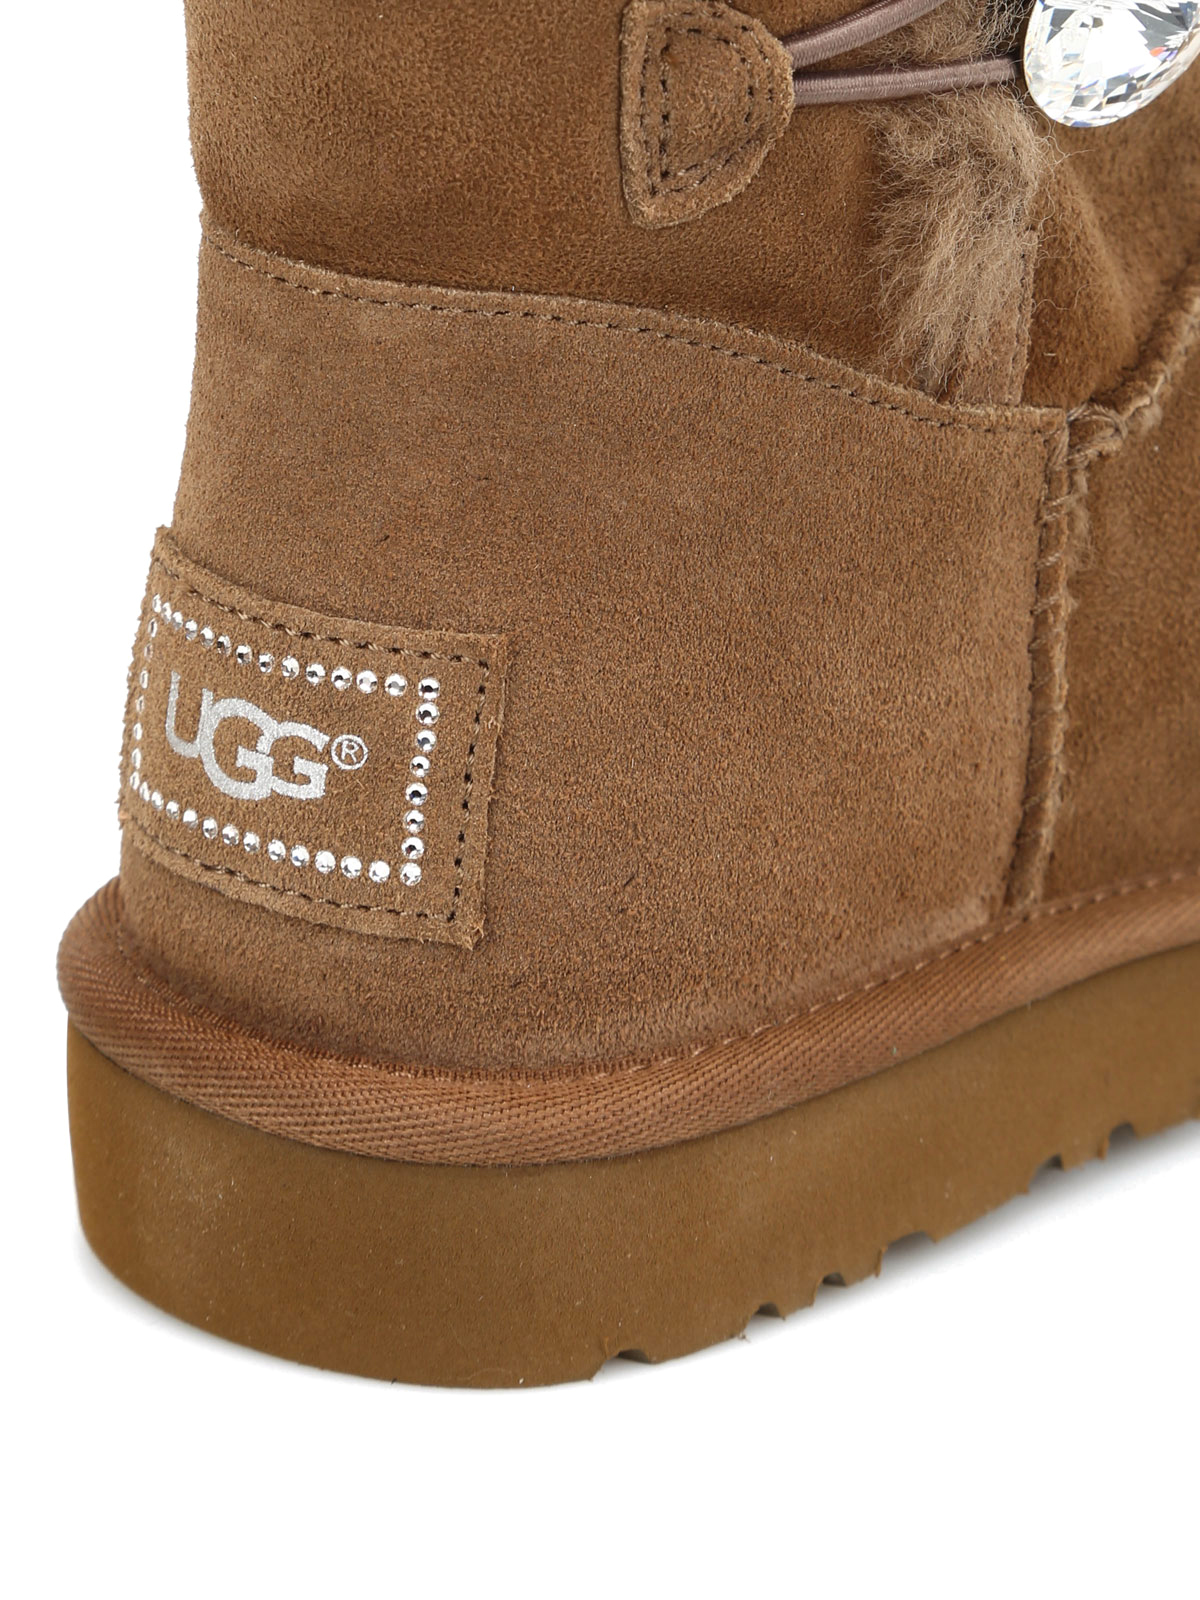 Ugg - Mini Bailey Button Bling ankle 